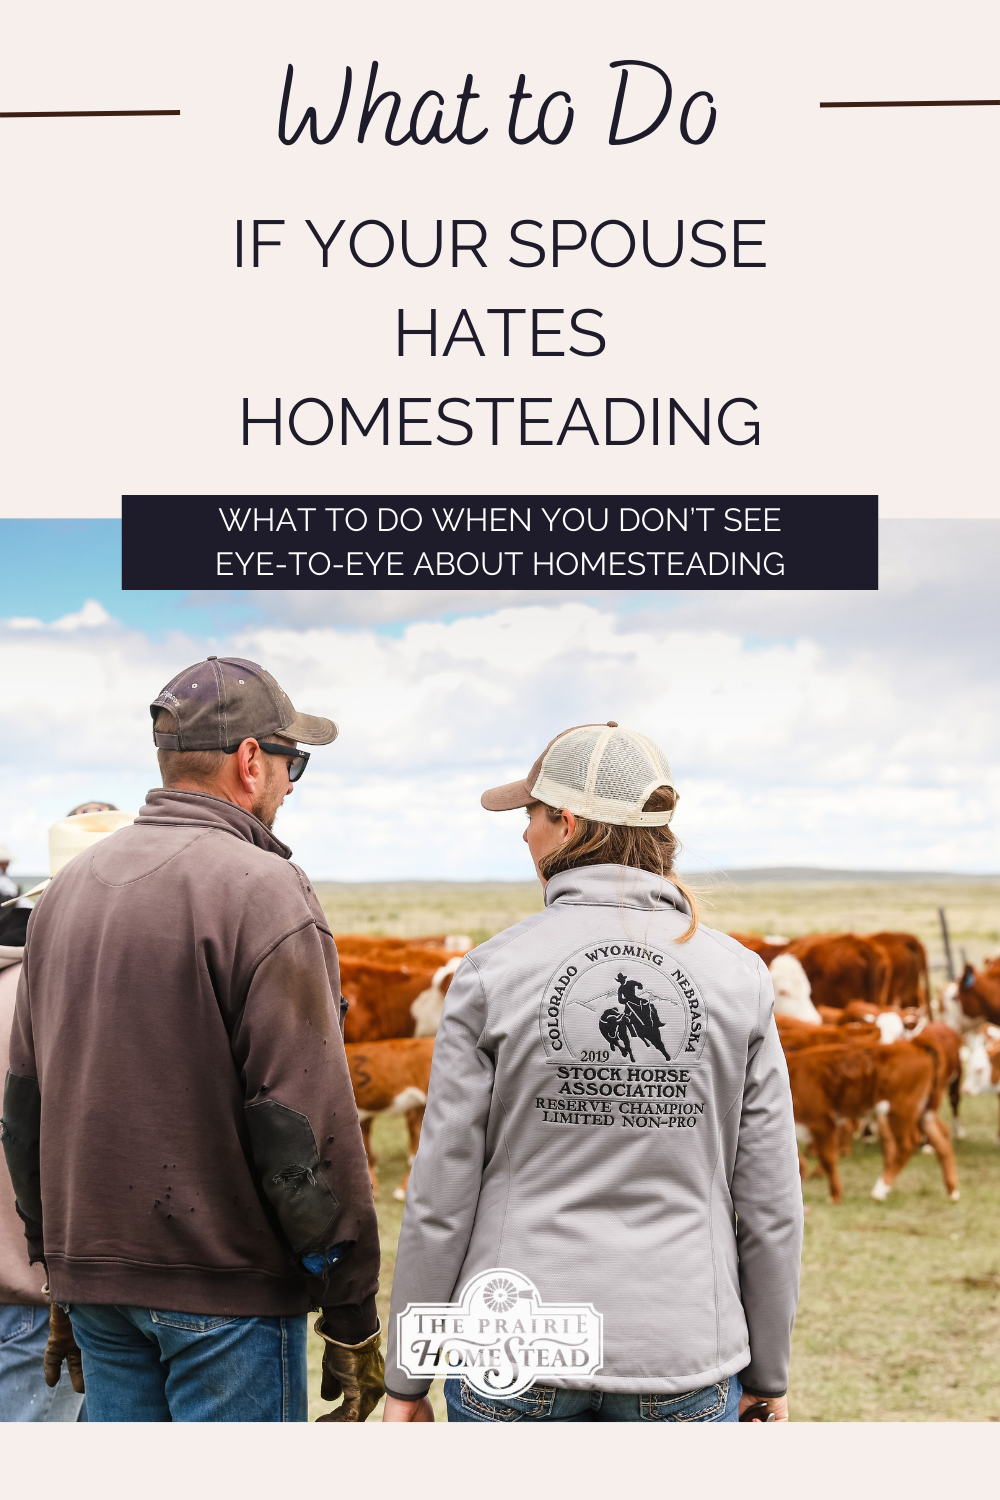 What to Do if Your Spouse Hates Homesteading